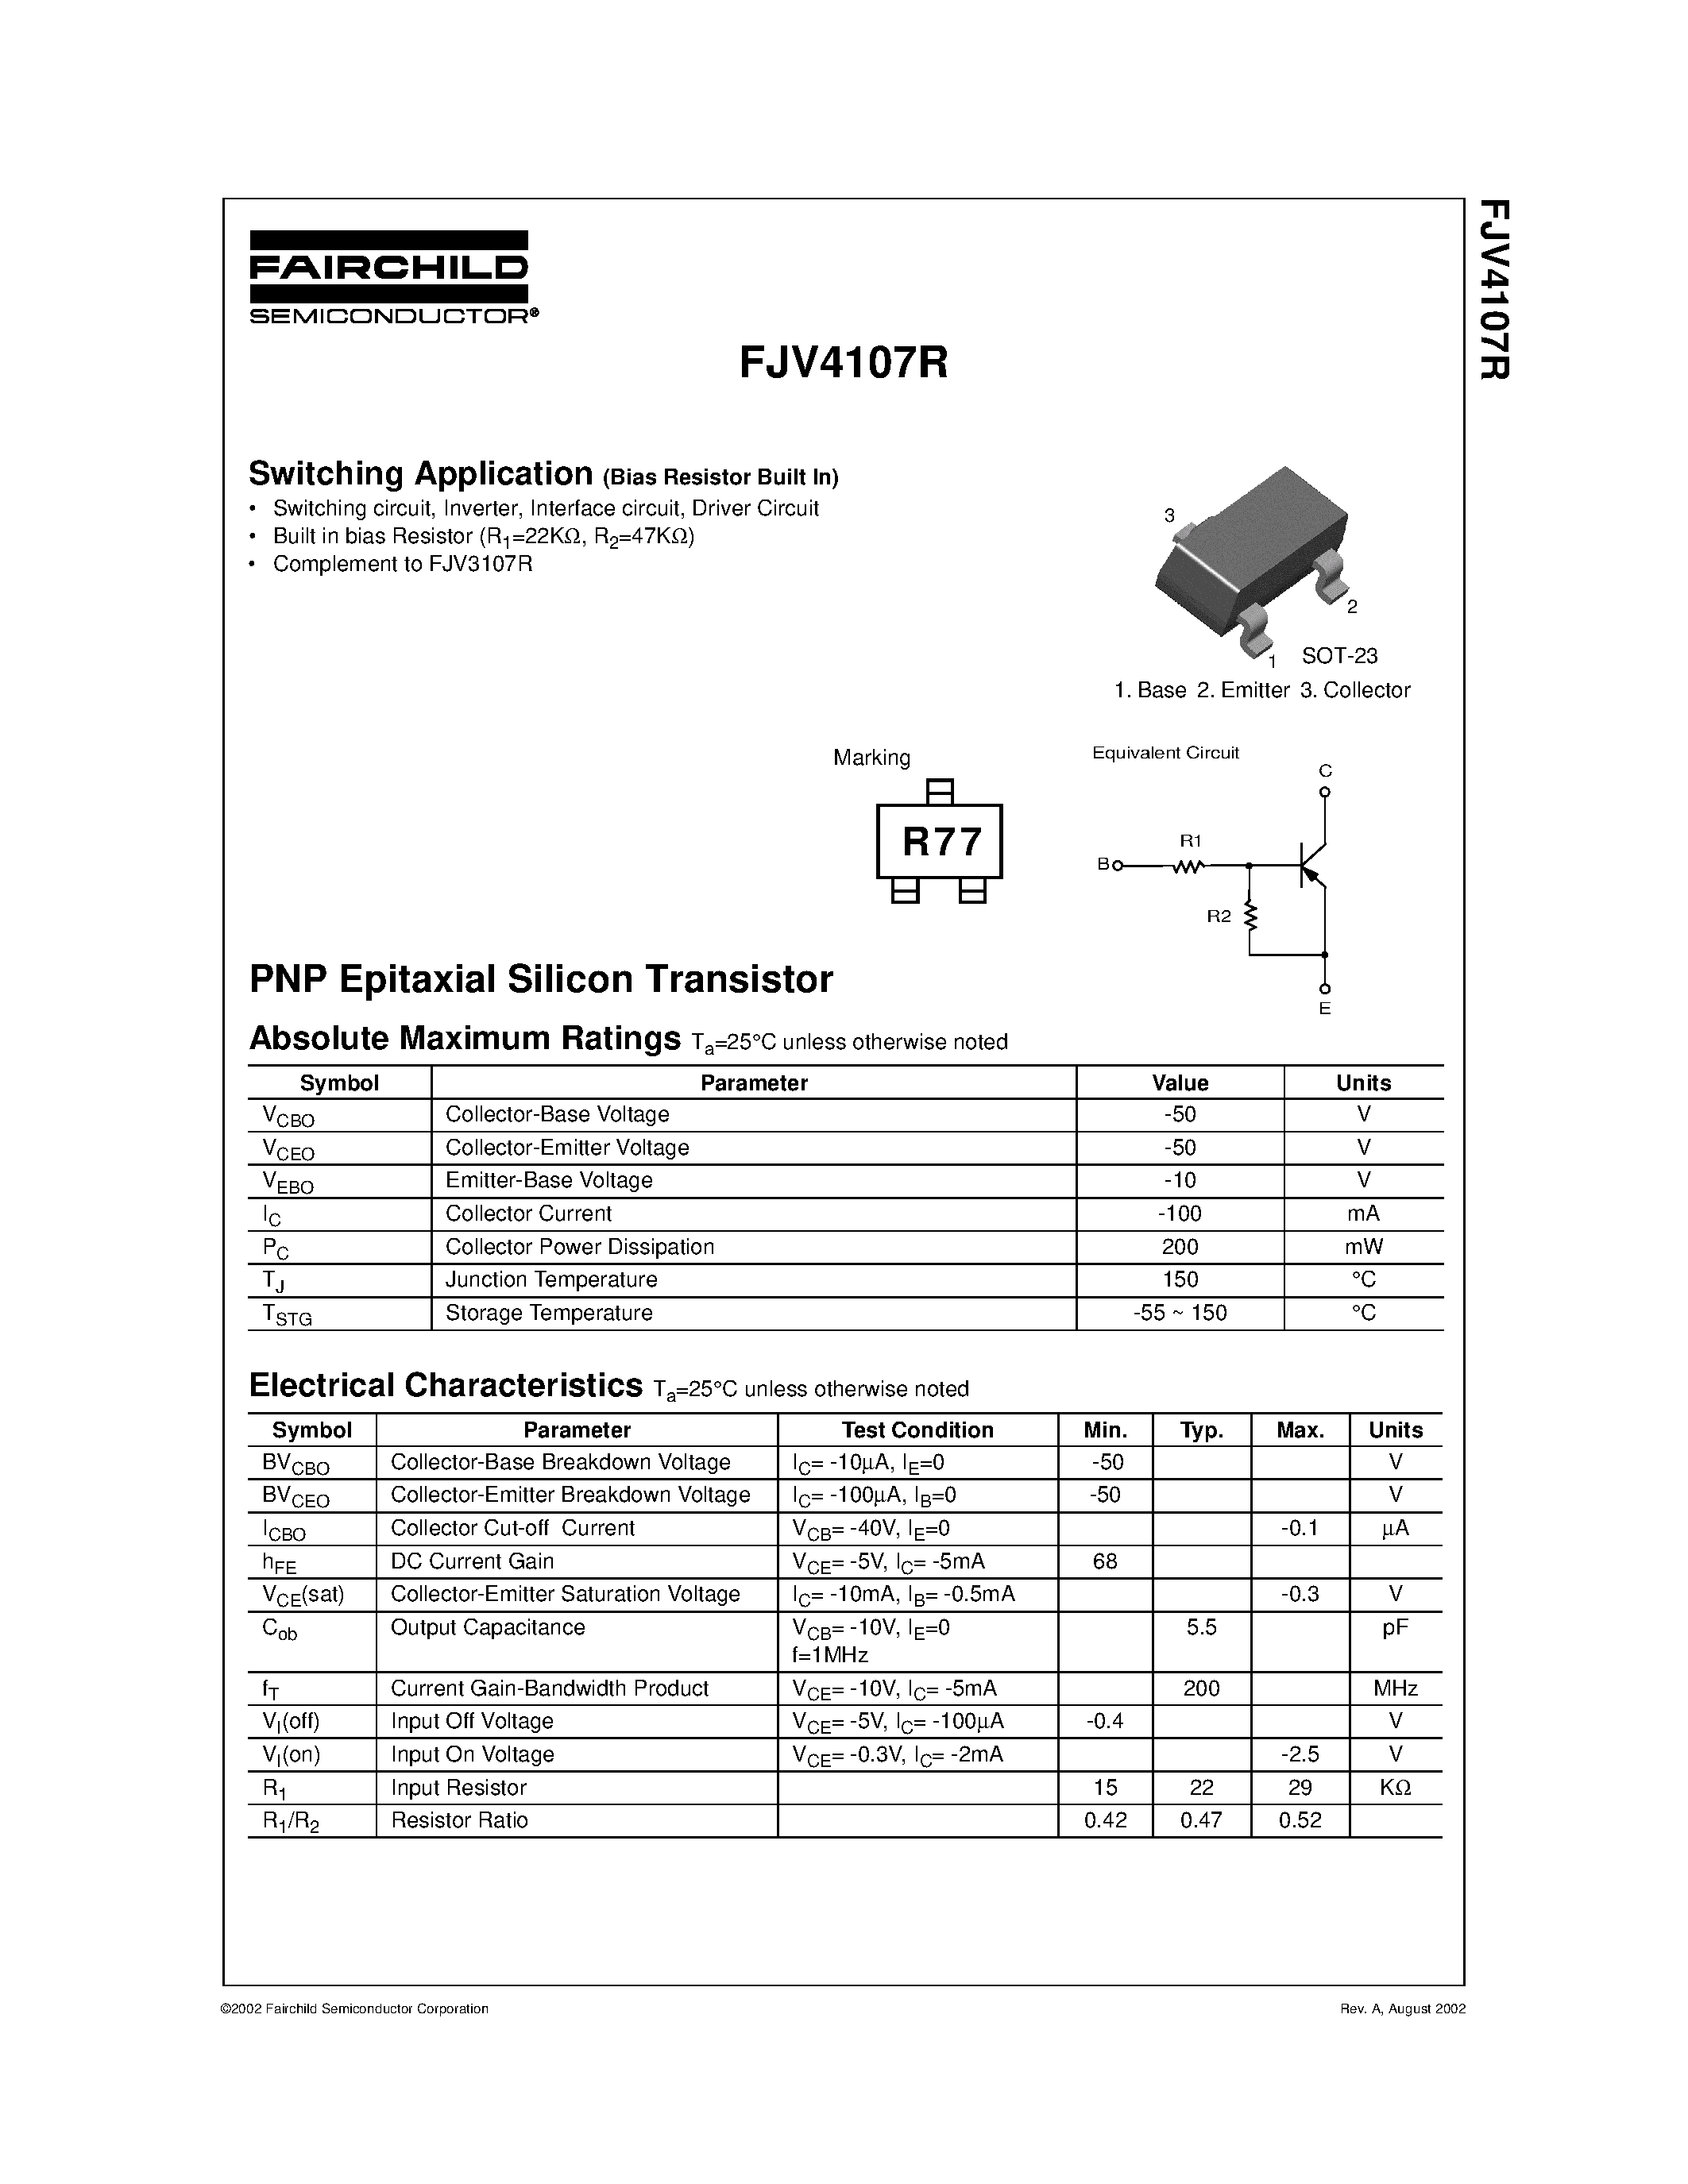 Datasheet FJV4107R - PNP Epitaxial Silicon Transistor page 1